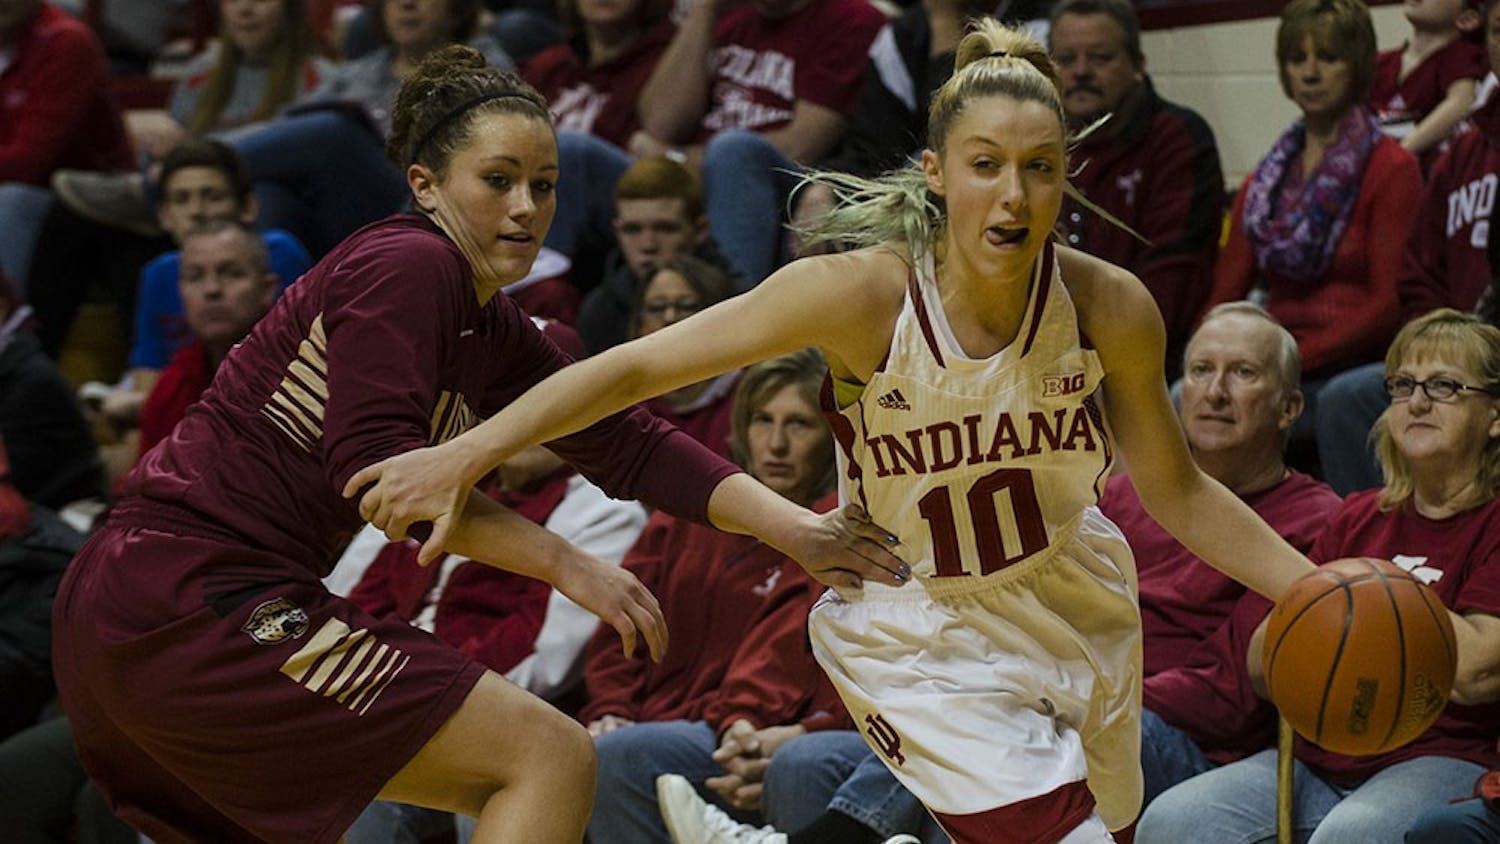 Sophomore guard Taylor Agler dribbles around IUPUI defender Sunday at Assembly Hall. The Hoosiers won 68-55 and will return to Assembly Hall next Wednesday to play Indiana University-Purdue University Fort Wayne (IPFW).